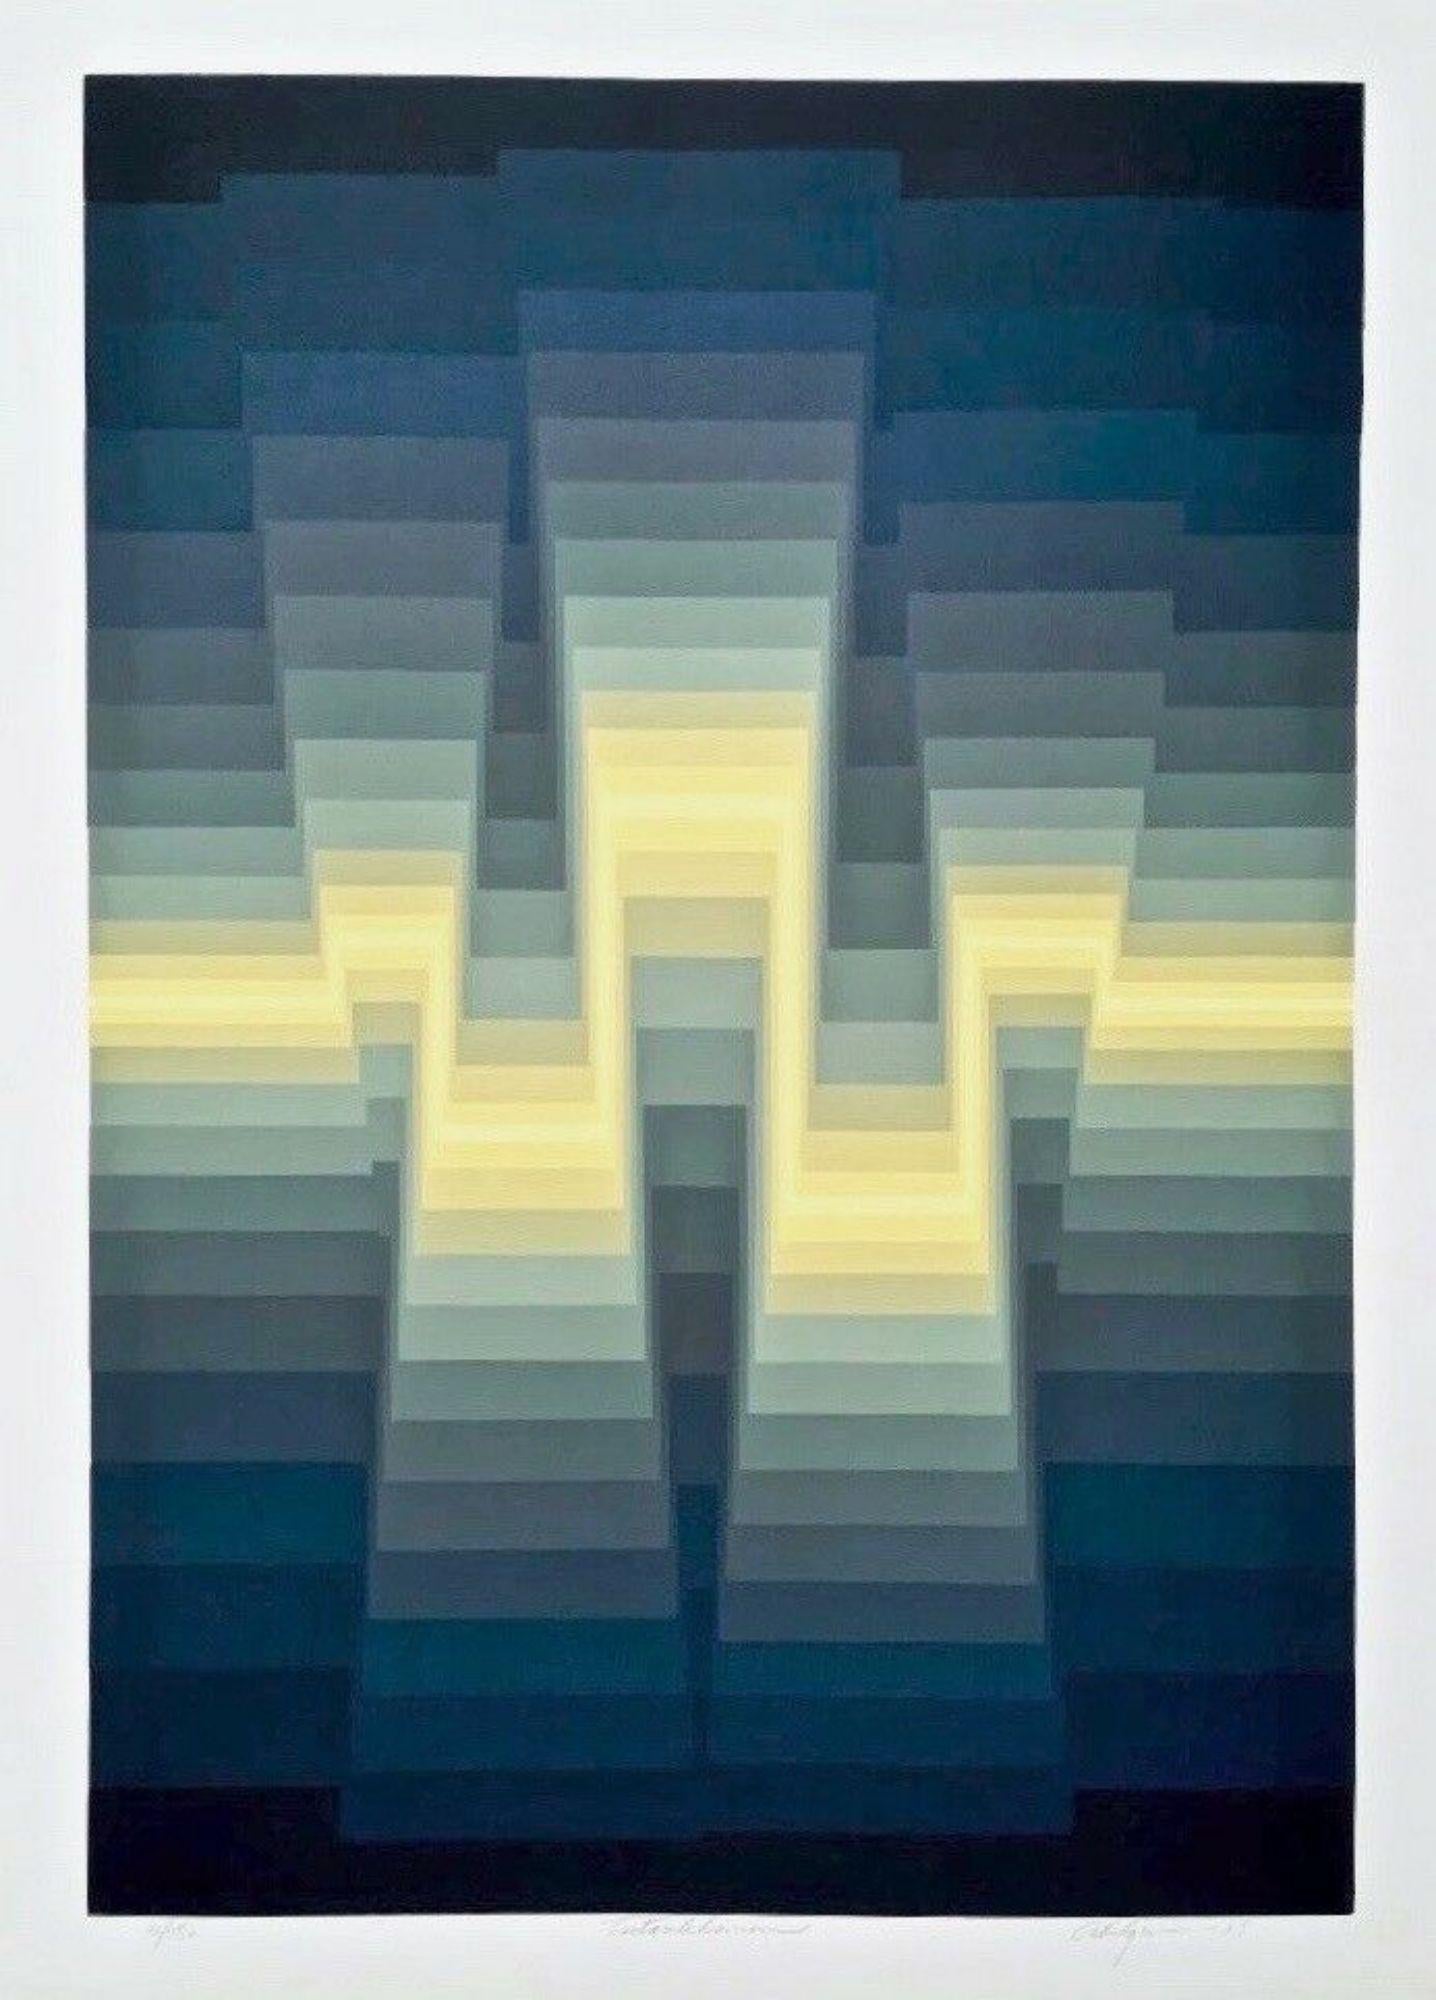 ROY AHLGREN (1927 - 2011) American Printmaker, painter and instructor, Ahlgren became known during the Op Art movement in the early 1960s. He created geometric abstract designs, and his compositions were unique with many being mathematically